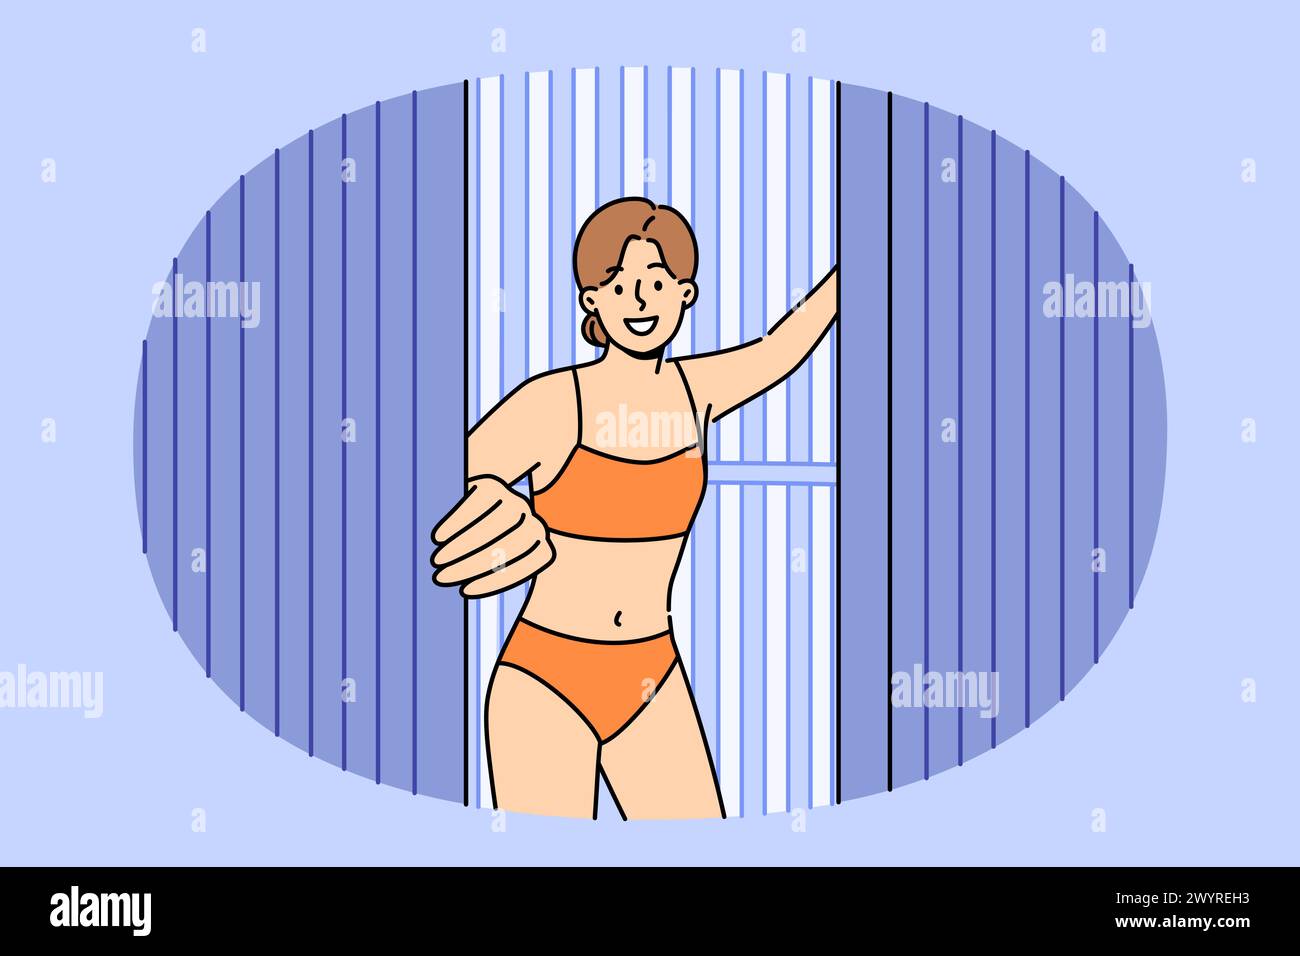 Woman comes out of vertical solarium, urging people to stop sunbathing, which causes skin cancer due to ultraviolet light. Girl visitor solarium stands in swimsuit, enjoying visit SPA treatments Stock Vector